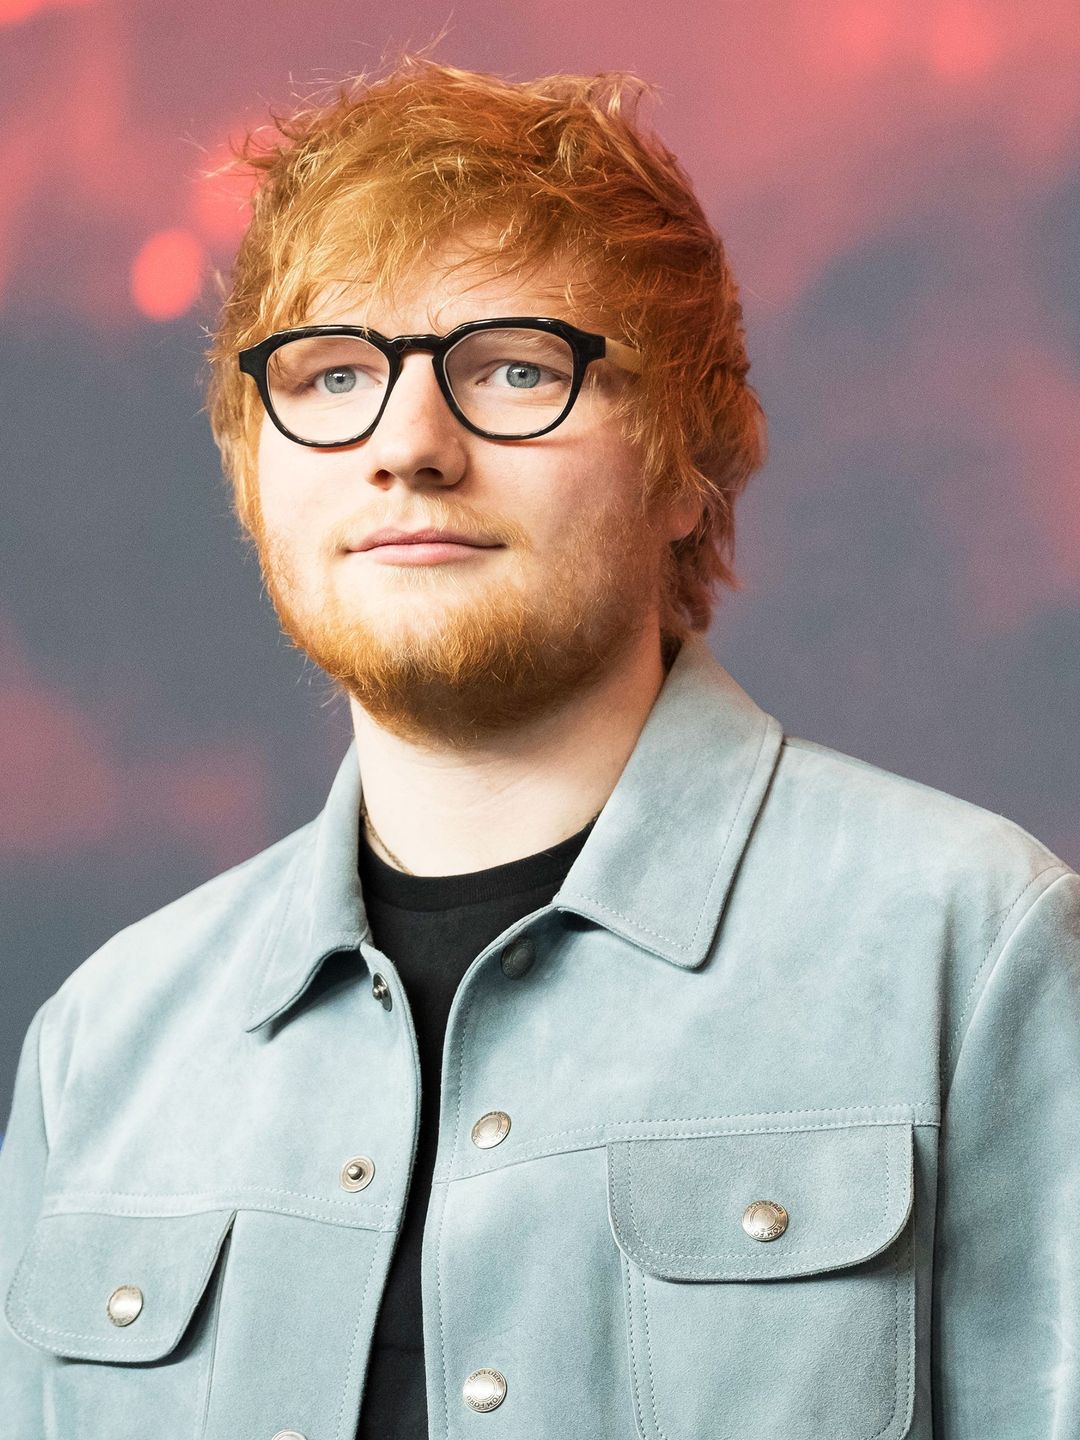 Ed Sheeran how did he became famous